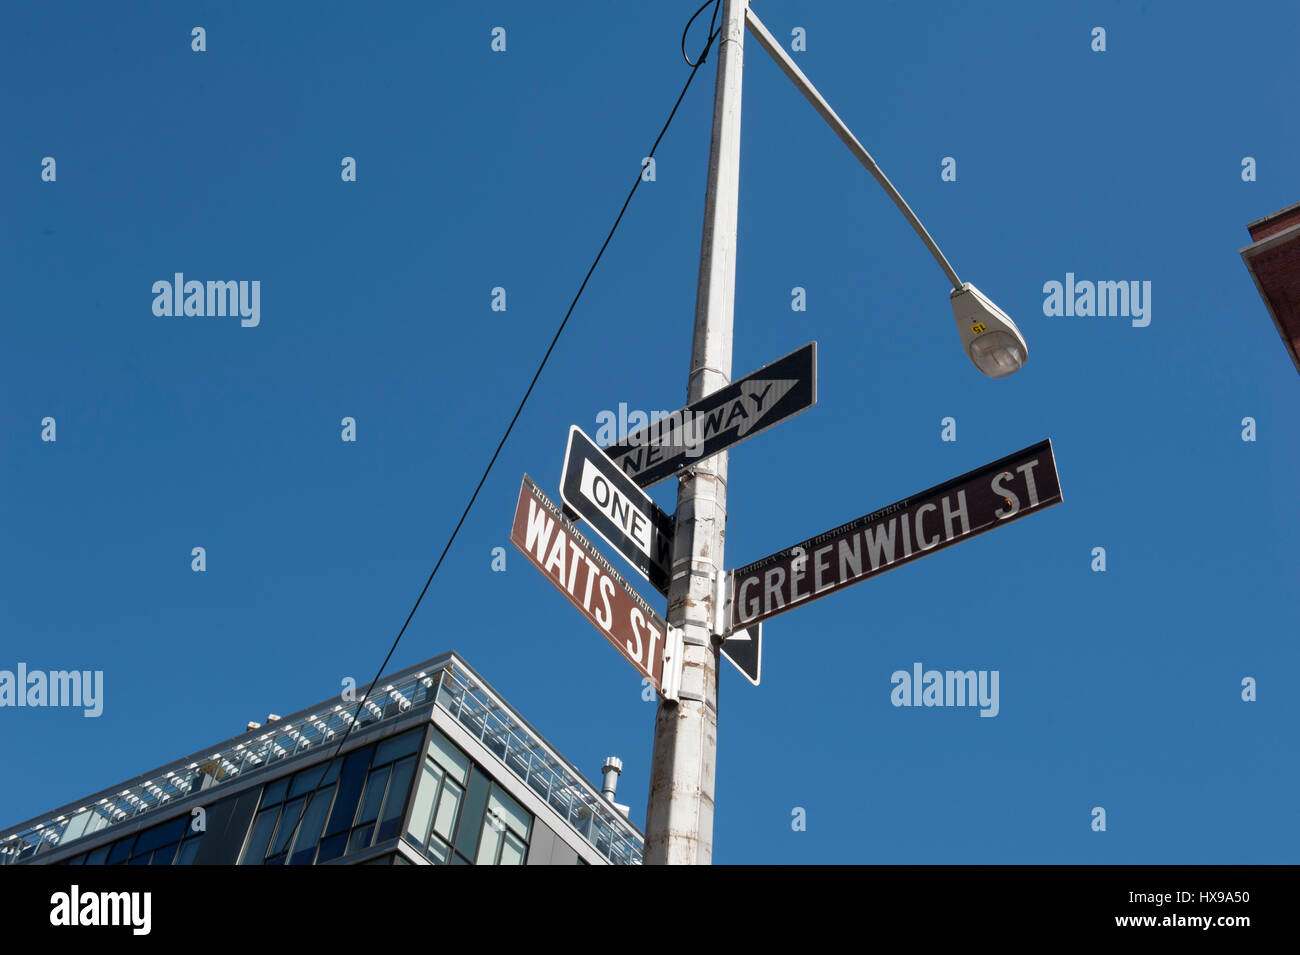 Street signs in Tribeca, part of Lower Manhattan, reference the Tribeca North Historic District. March 23, 2017 Stock Photo